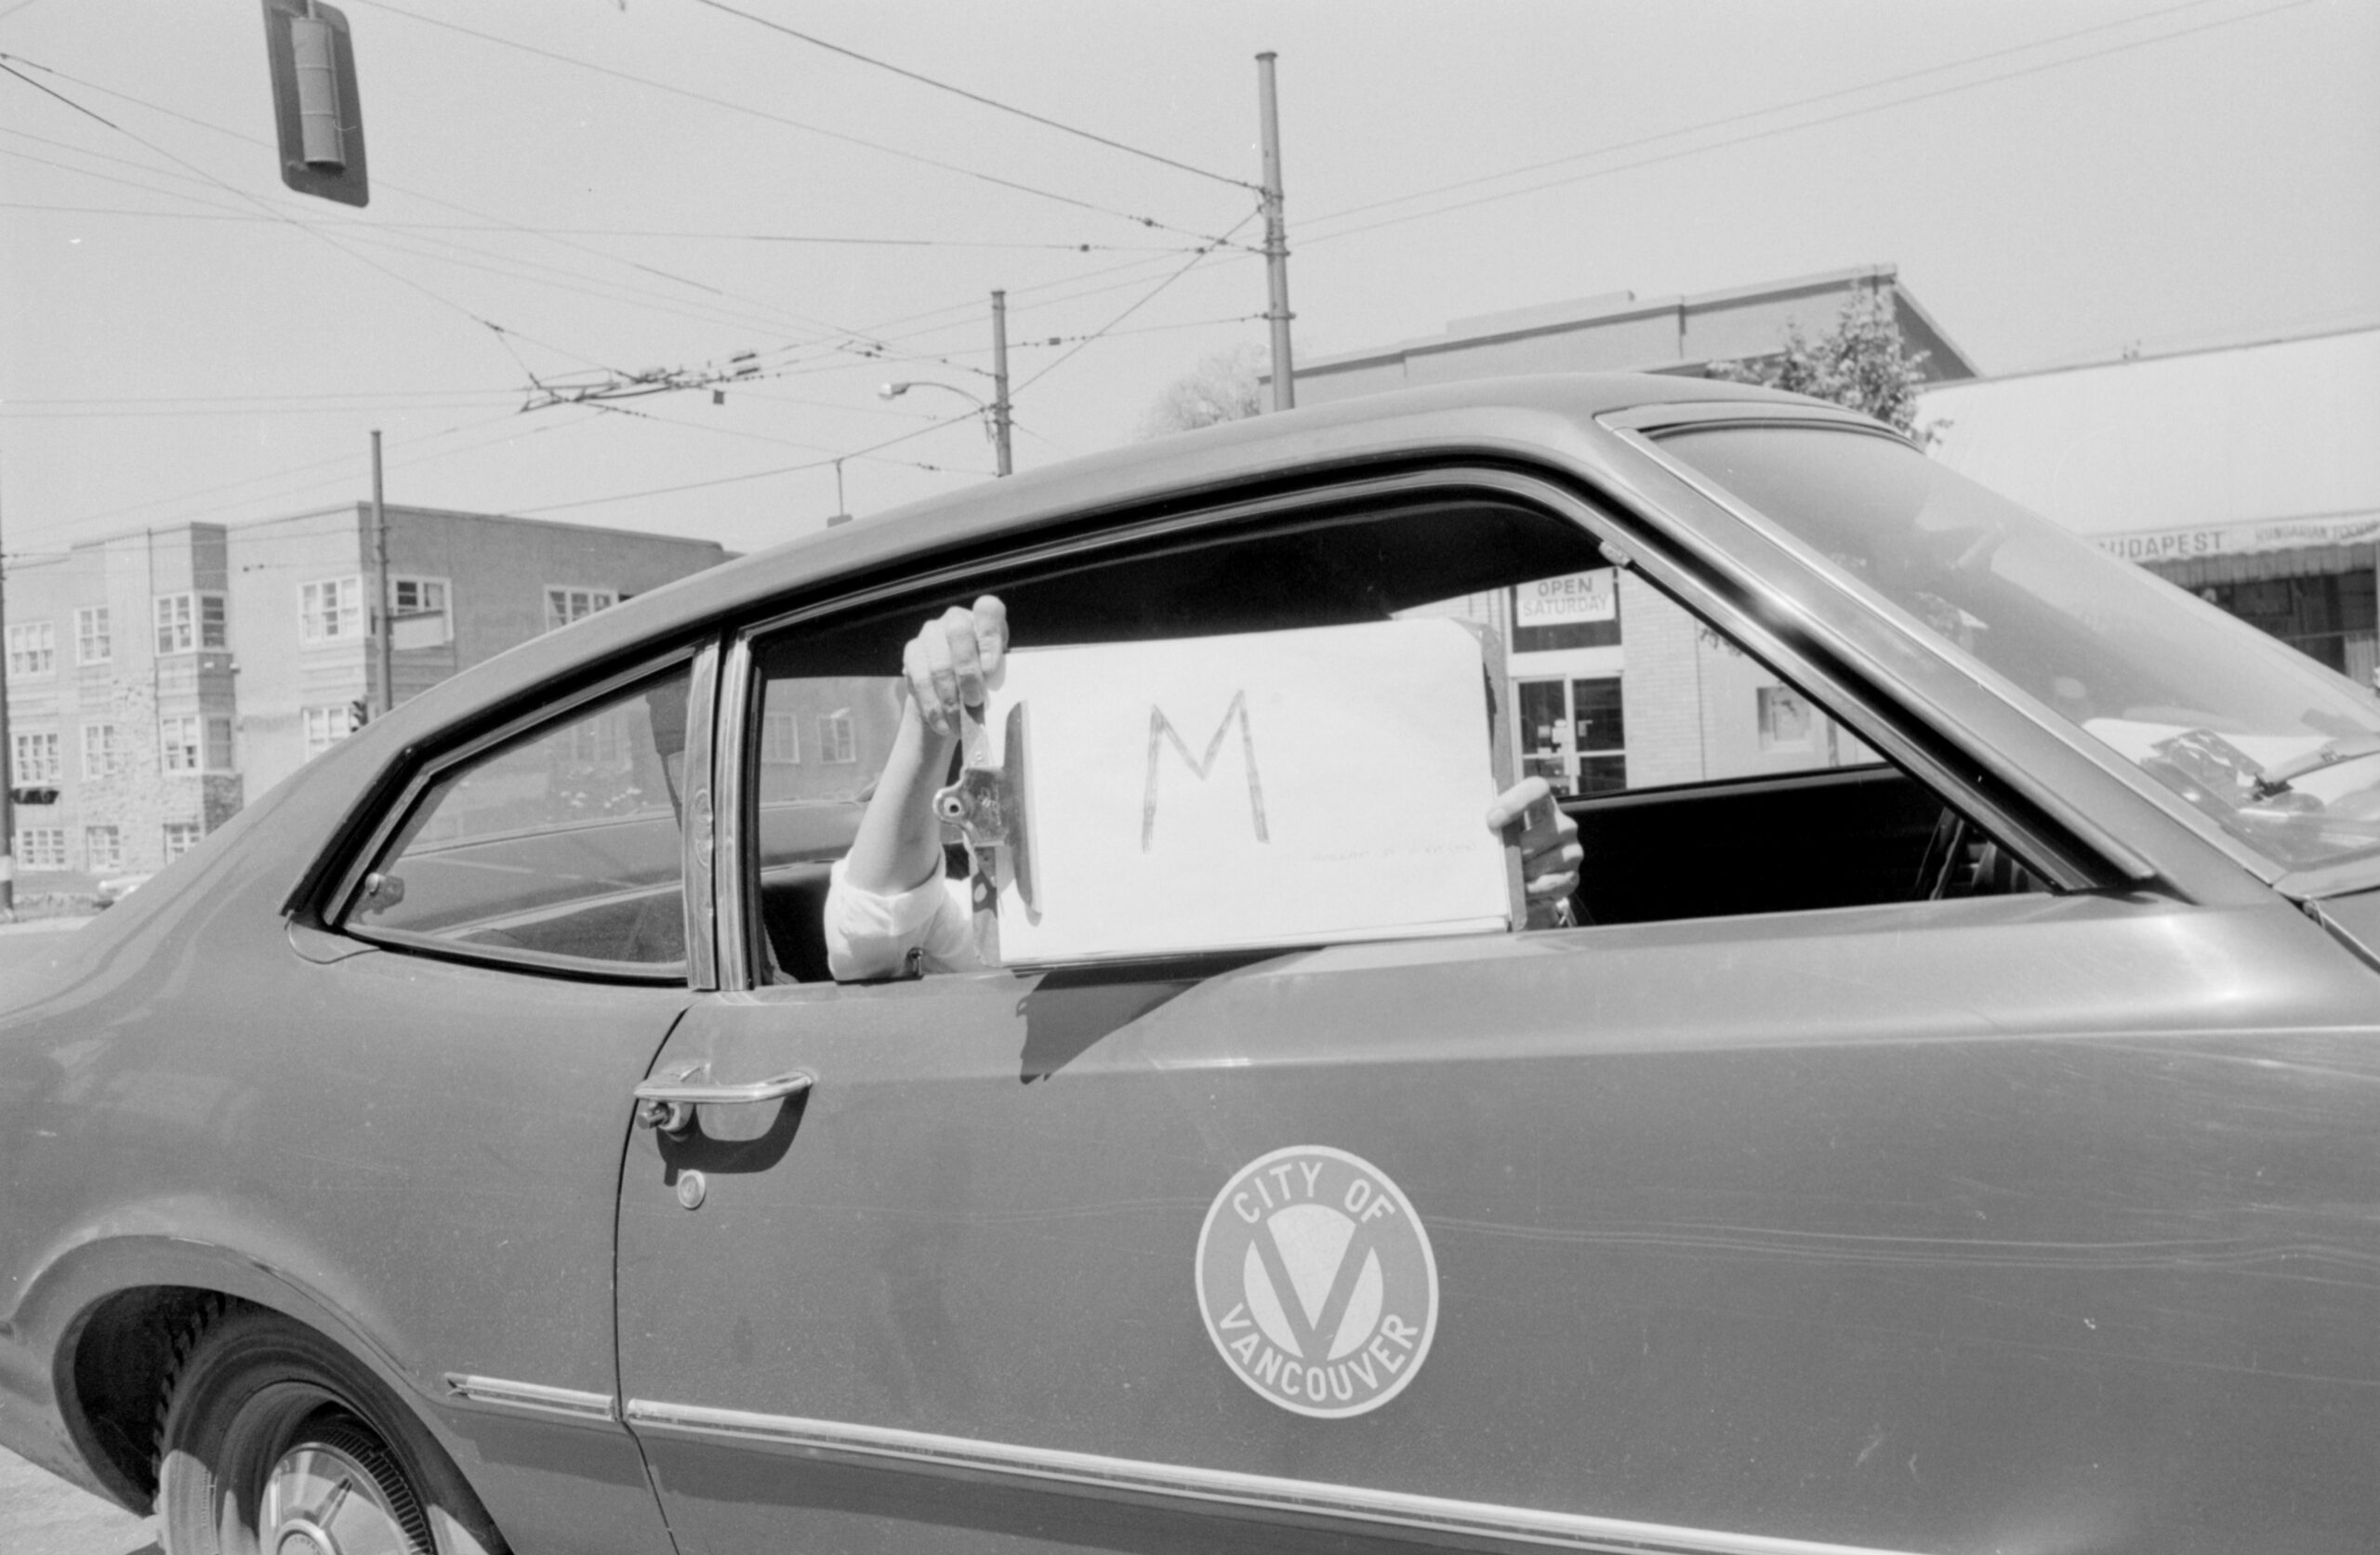 Person holding "M" sign out of a City of Vancouver car. Reference code: COV-S505-1-: 2019-103.0314